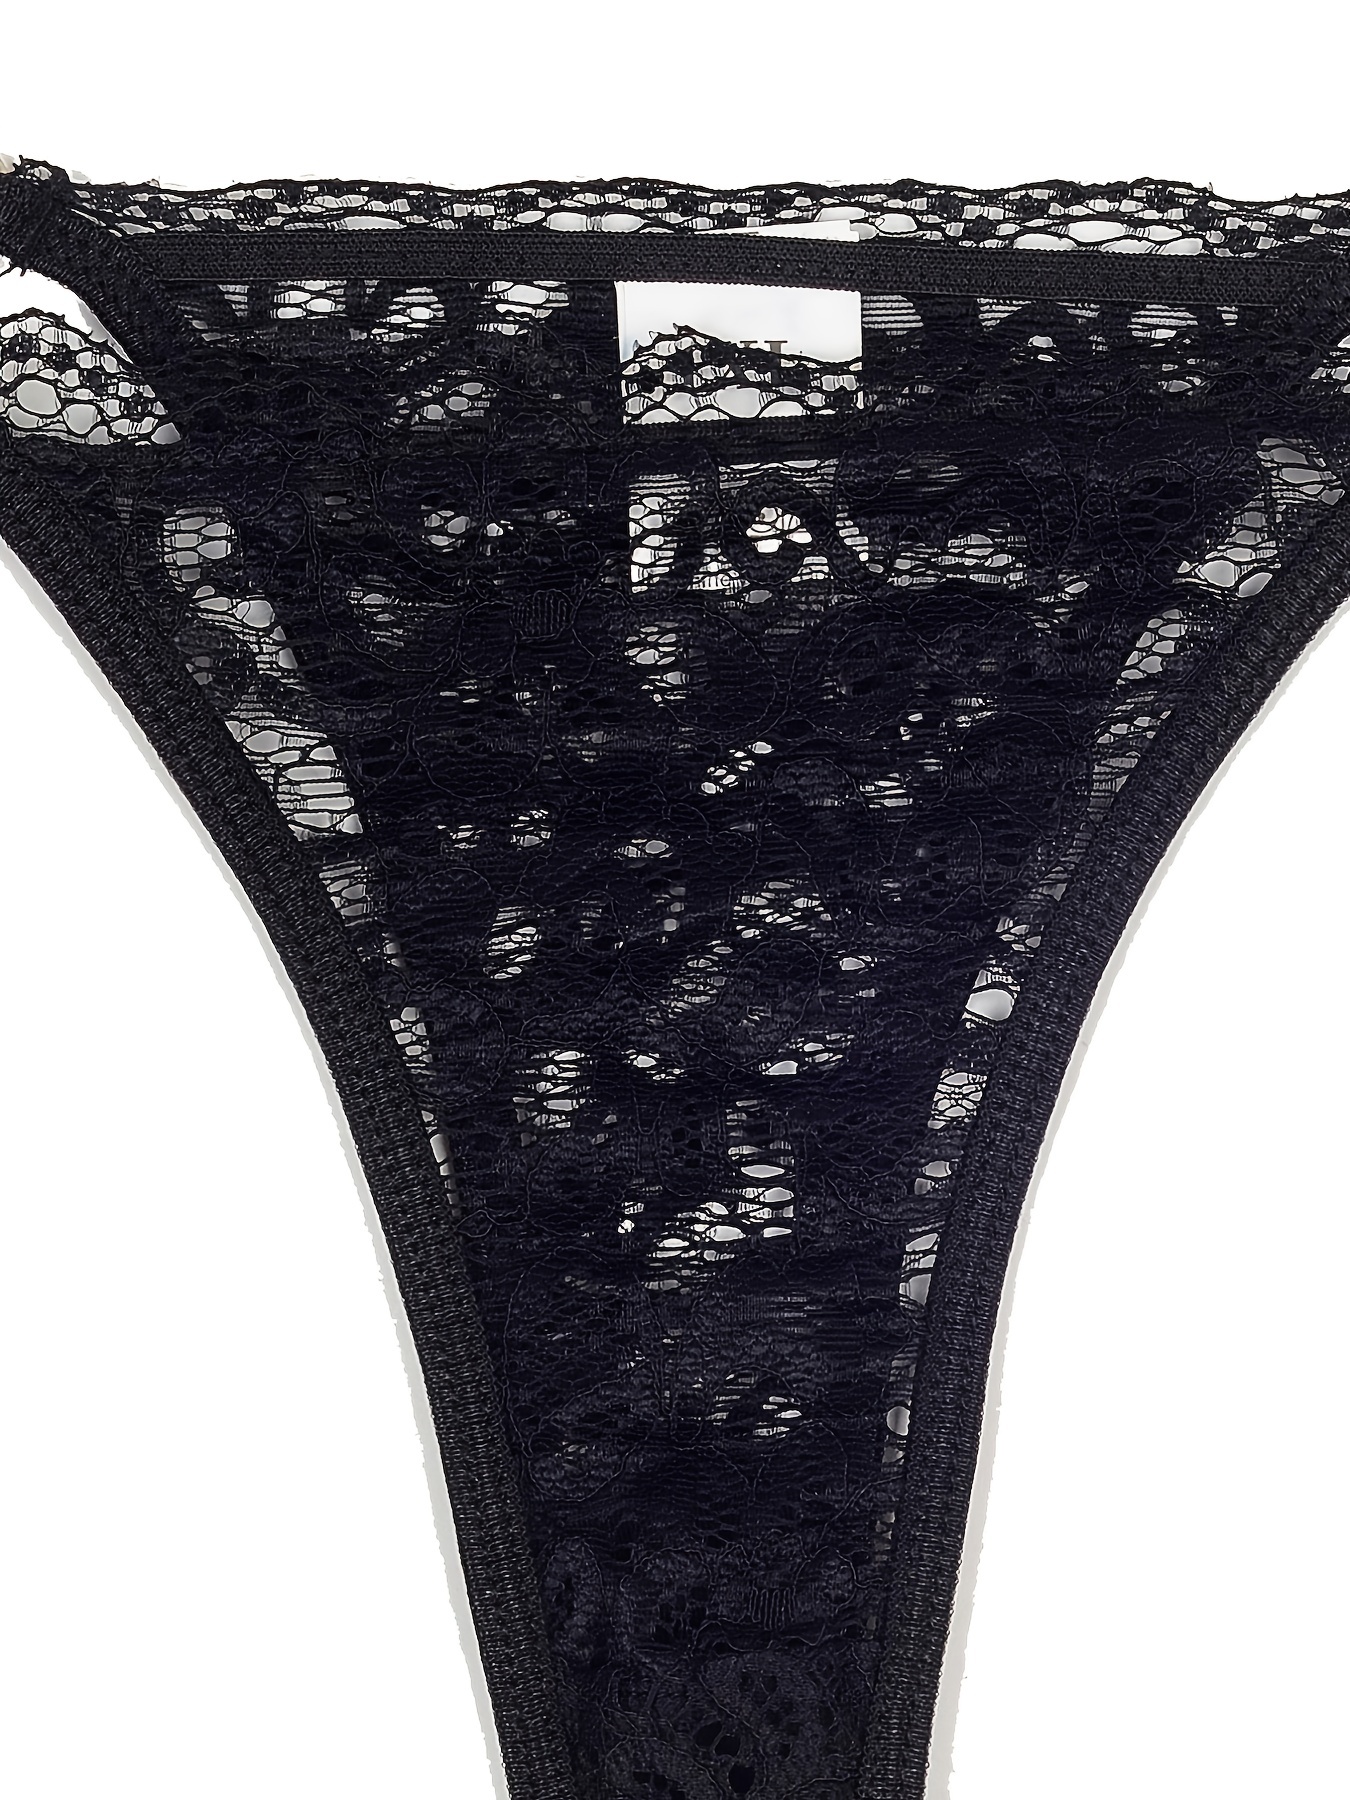 Generic 2X Women's Sexy Lace Open Crotch G-String Low Rise Underwear  Panties